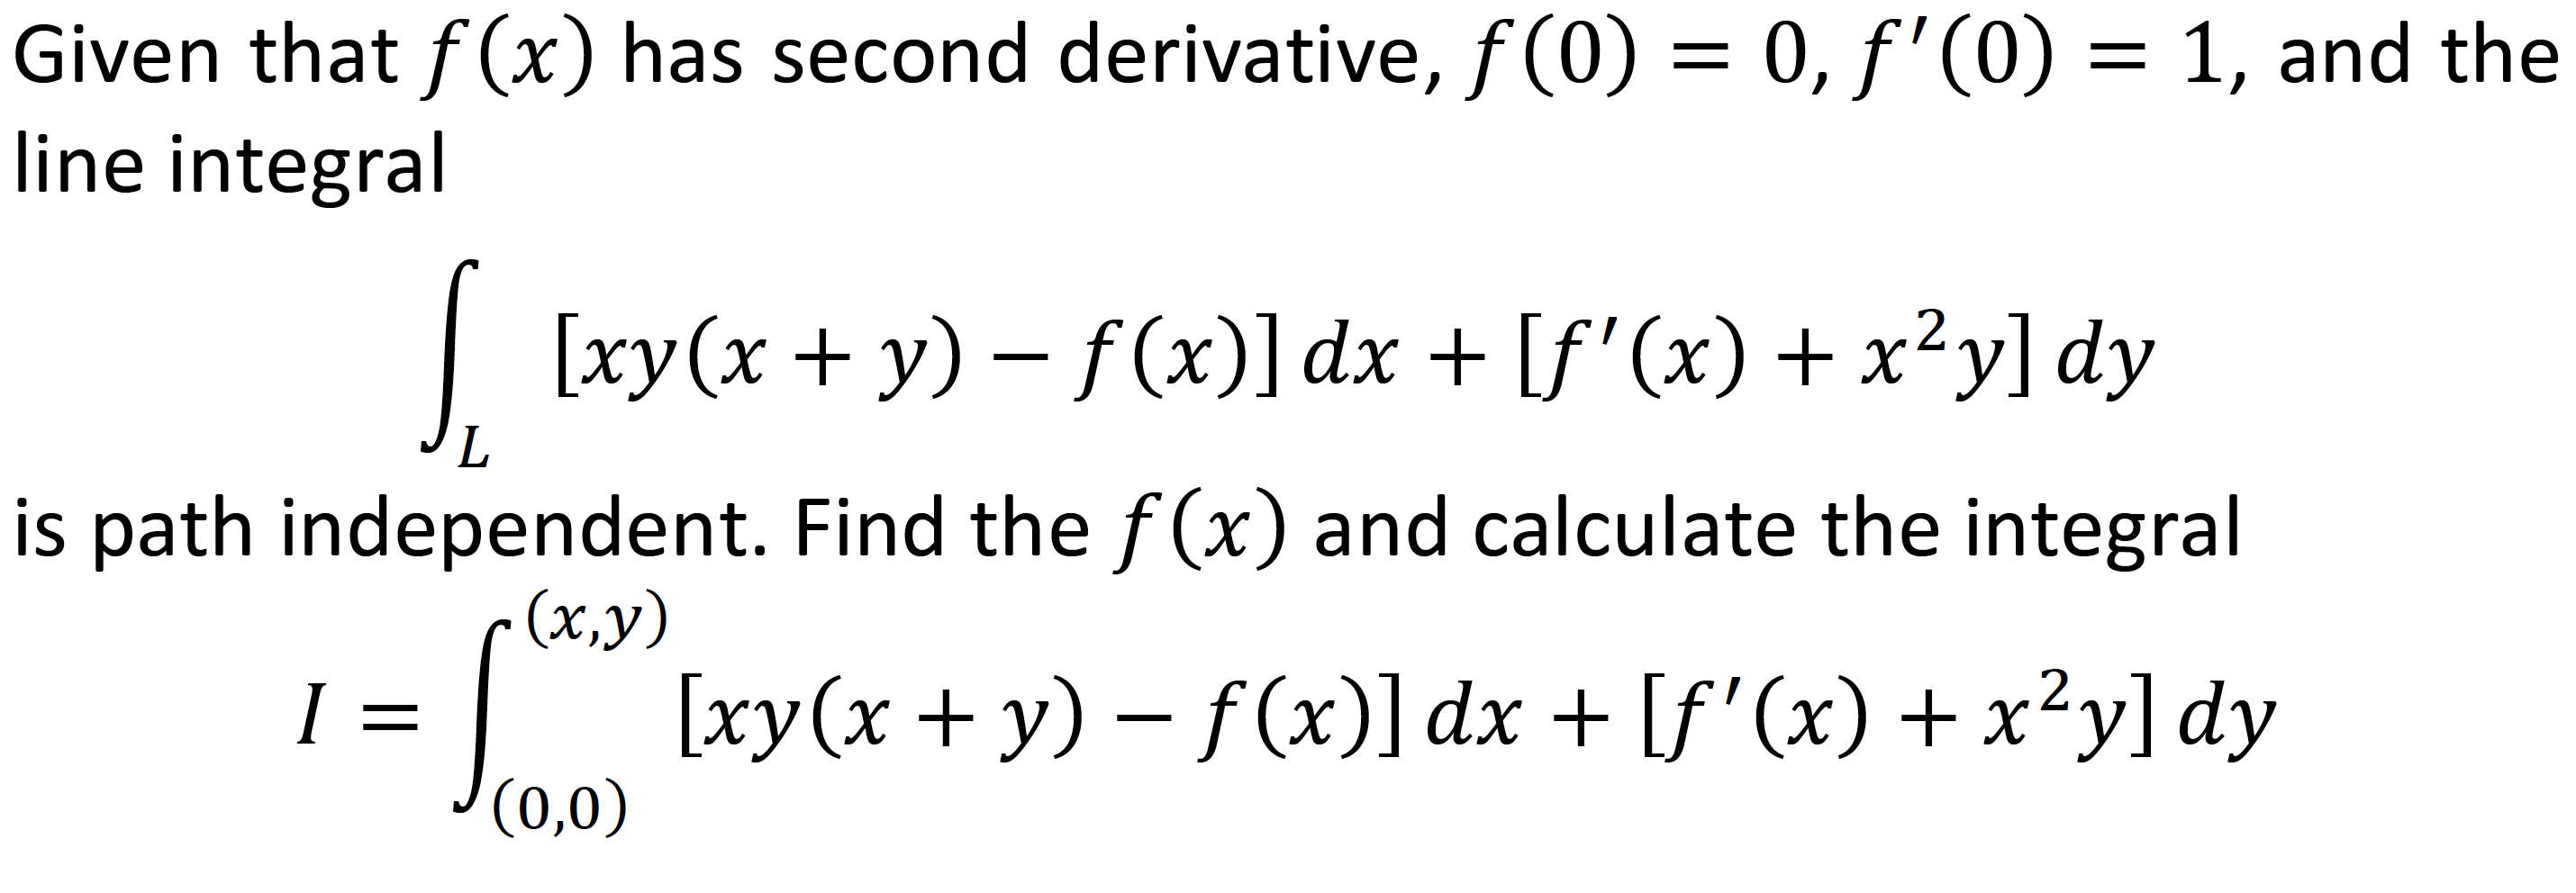 Given that f(x) has second derivative, f(0) = 0, f'(0) = 1, and the
line integral
| [xy(x + y) – f(x)]dx + [f'(x) + x²y] dy
is path independent. Find thef (x) and calculate the integral
- (x,y)
| [xy(x + y) - f (x)] dx + [f'(x) + x²y] dy
J(0,0)
